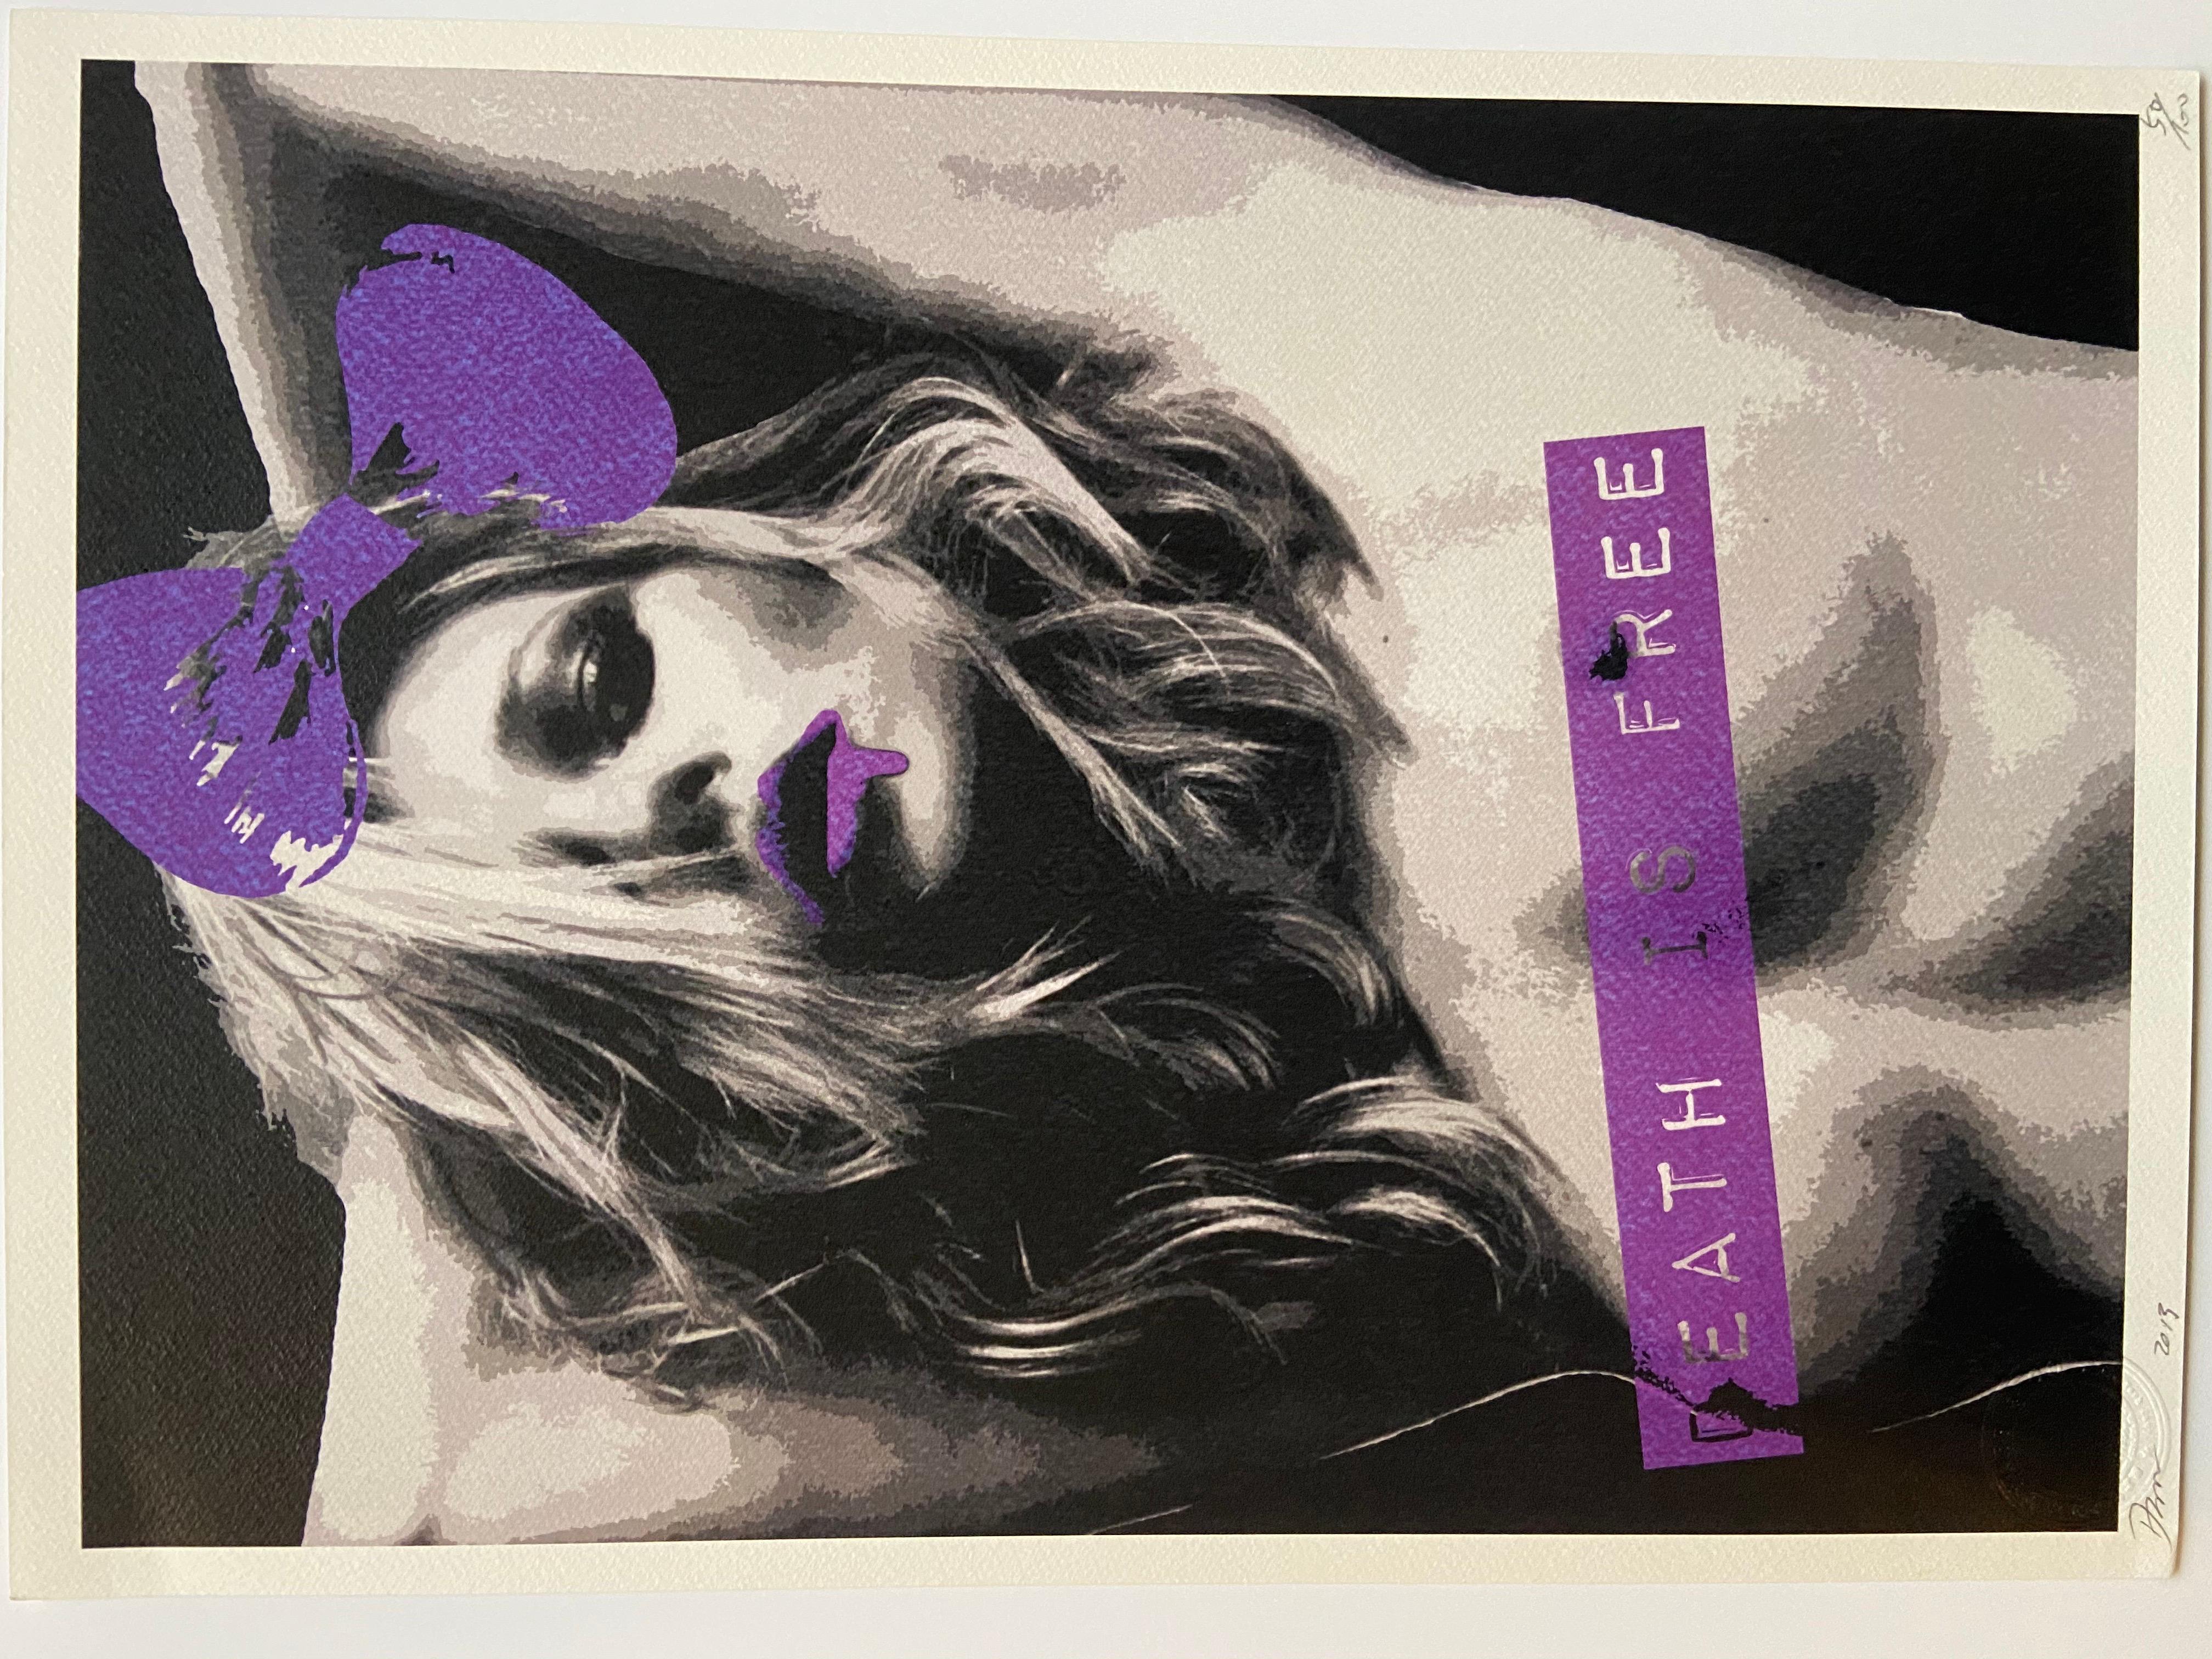 Death NYC - Purple Death is free - 2015 For Sale 2